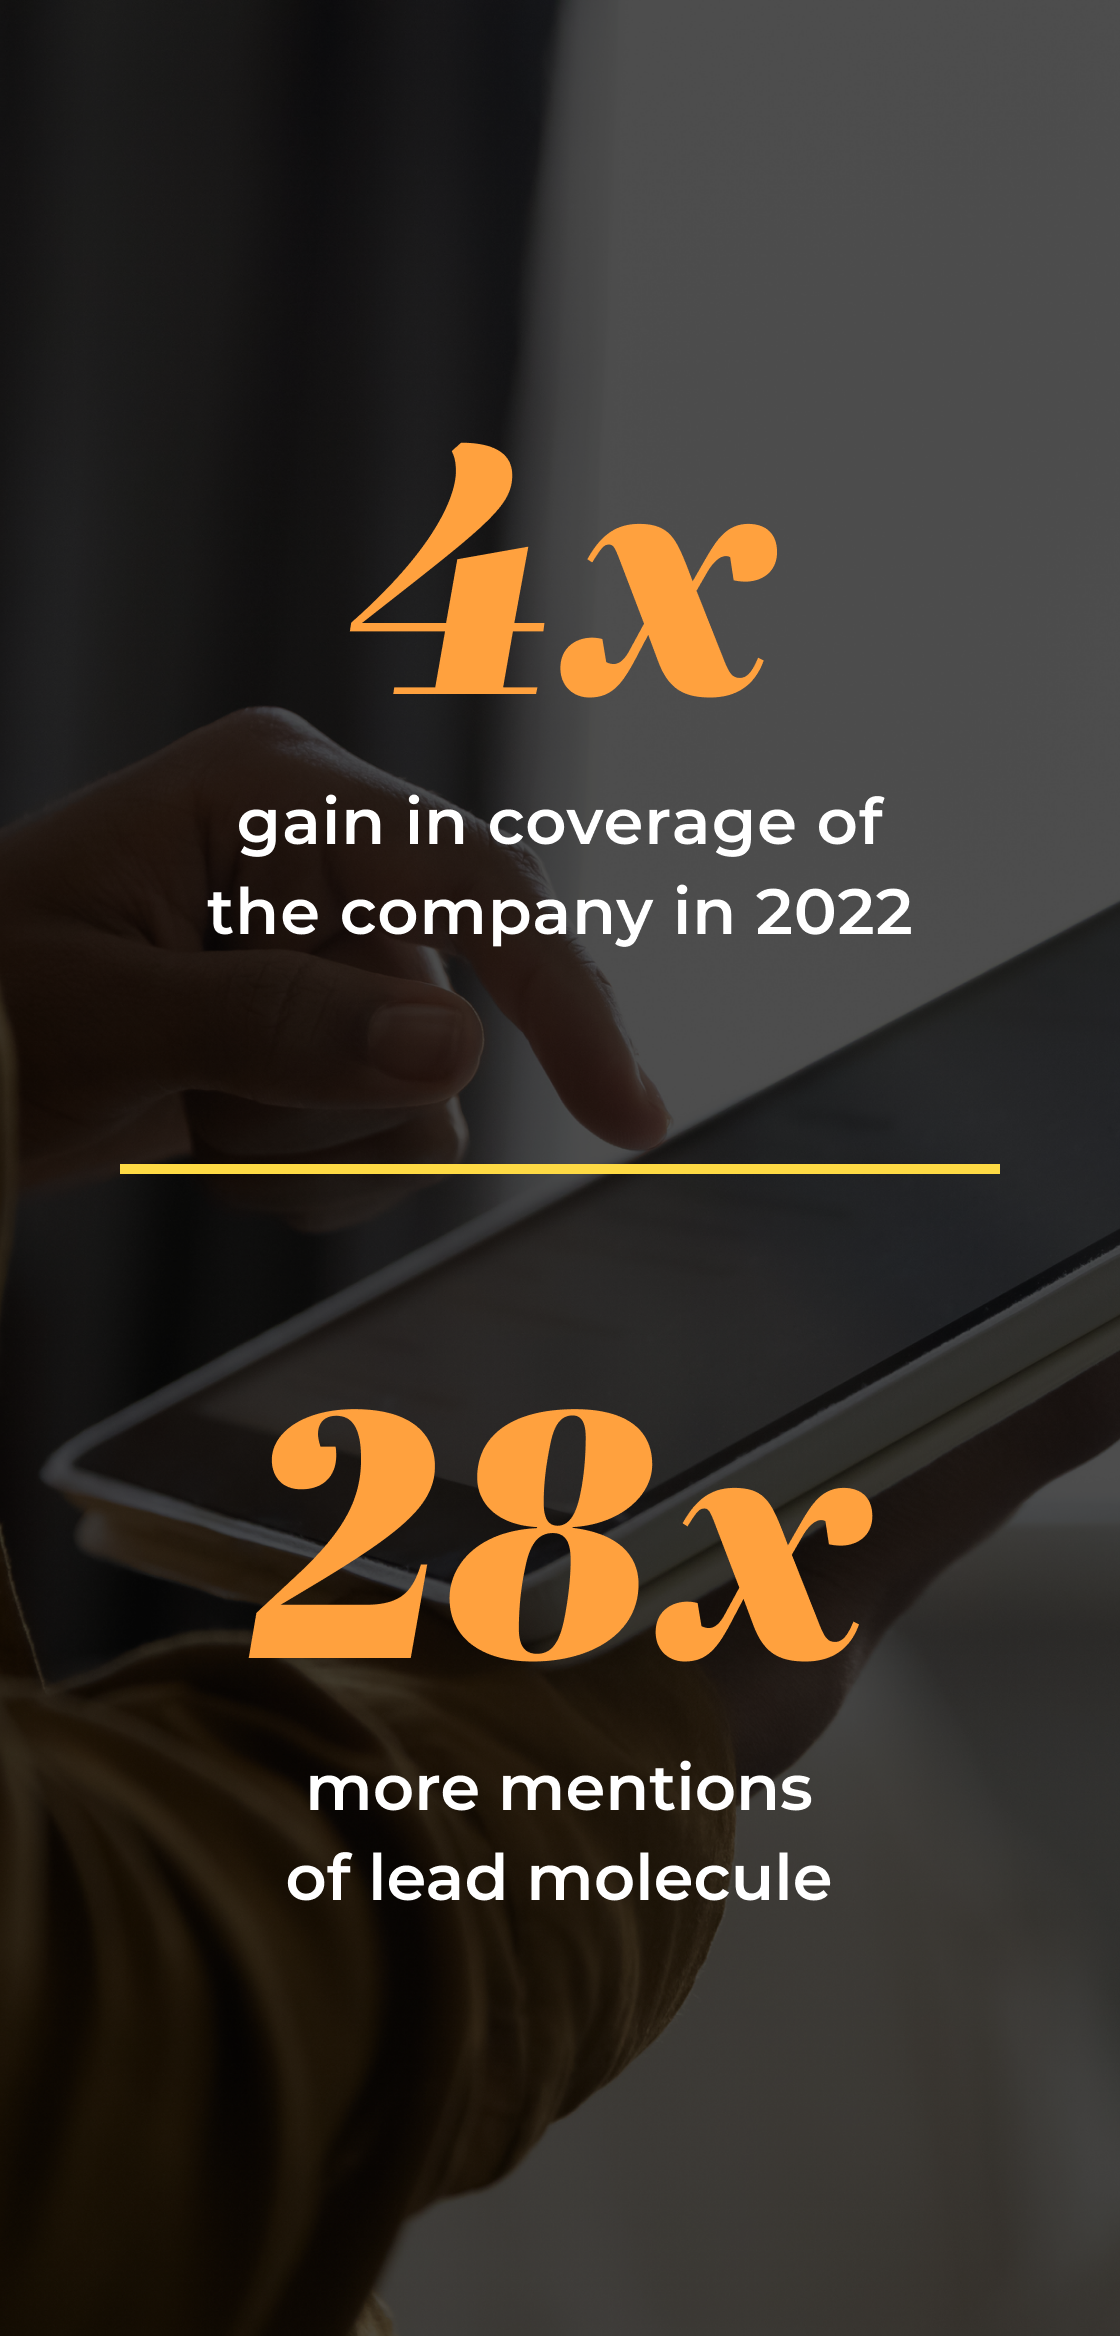 A graphic with statistics regarding gains in company coverage is displayed over an image of a person scrolling on a tablet.